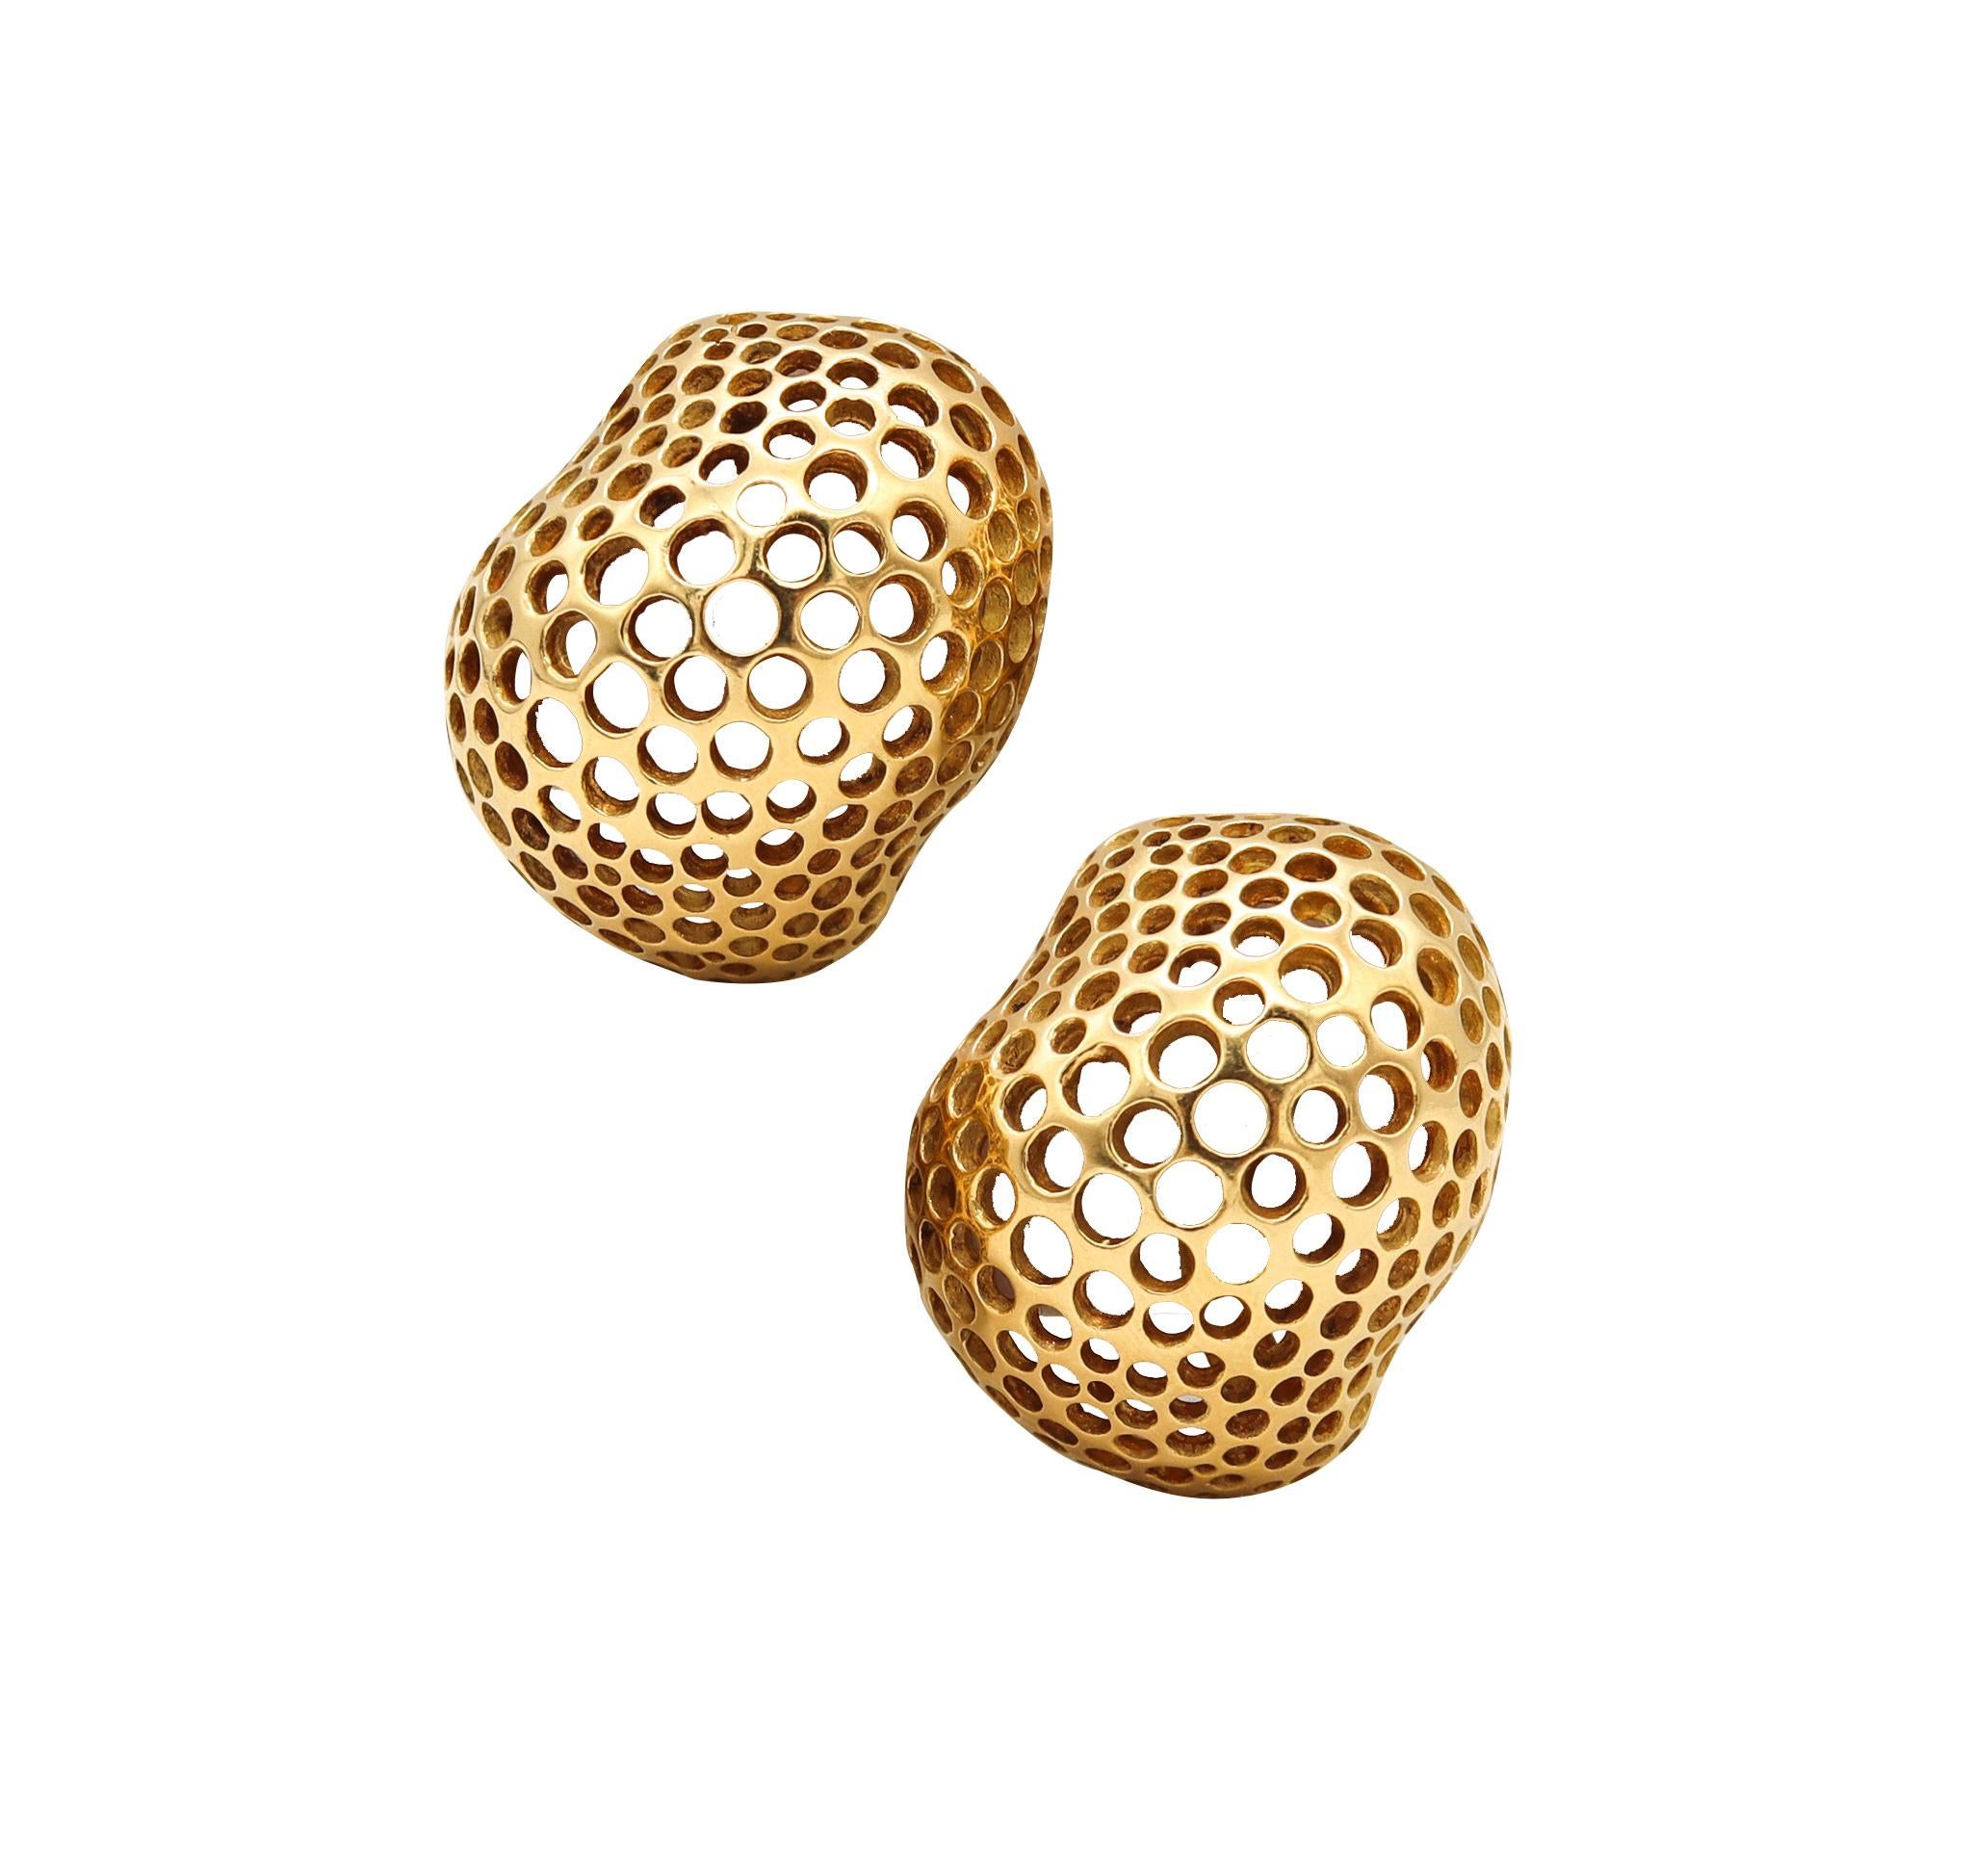 Pair of Perforations earrings designed by Angela Cummings.

Beautiful organic pair, created by Angela Cummings back in the early 1980's. These modernist Perforations free-form earrings has been crafted in solid yellow gold of 18 karats, with semi